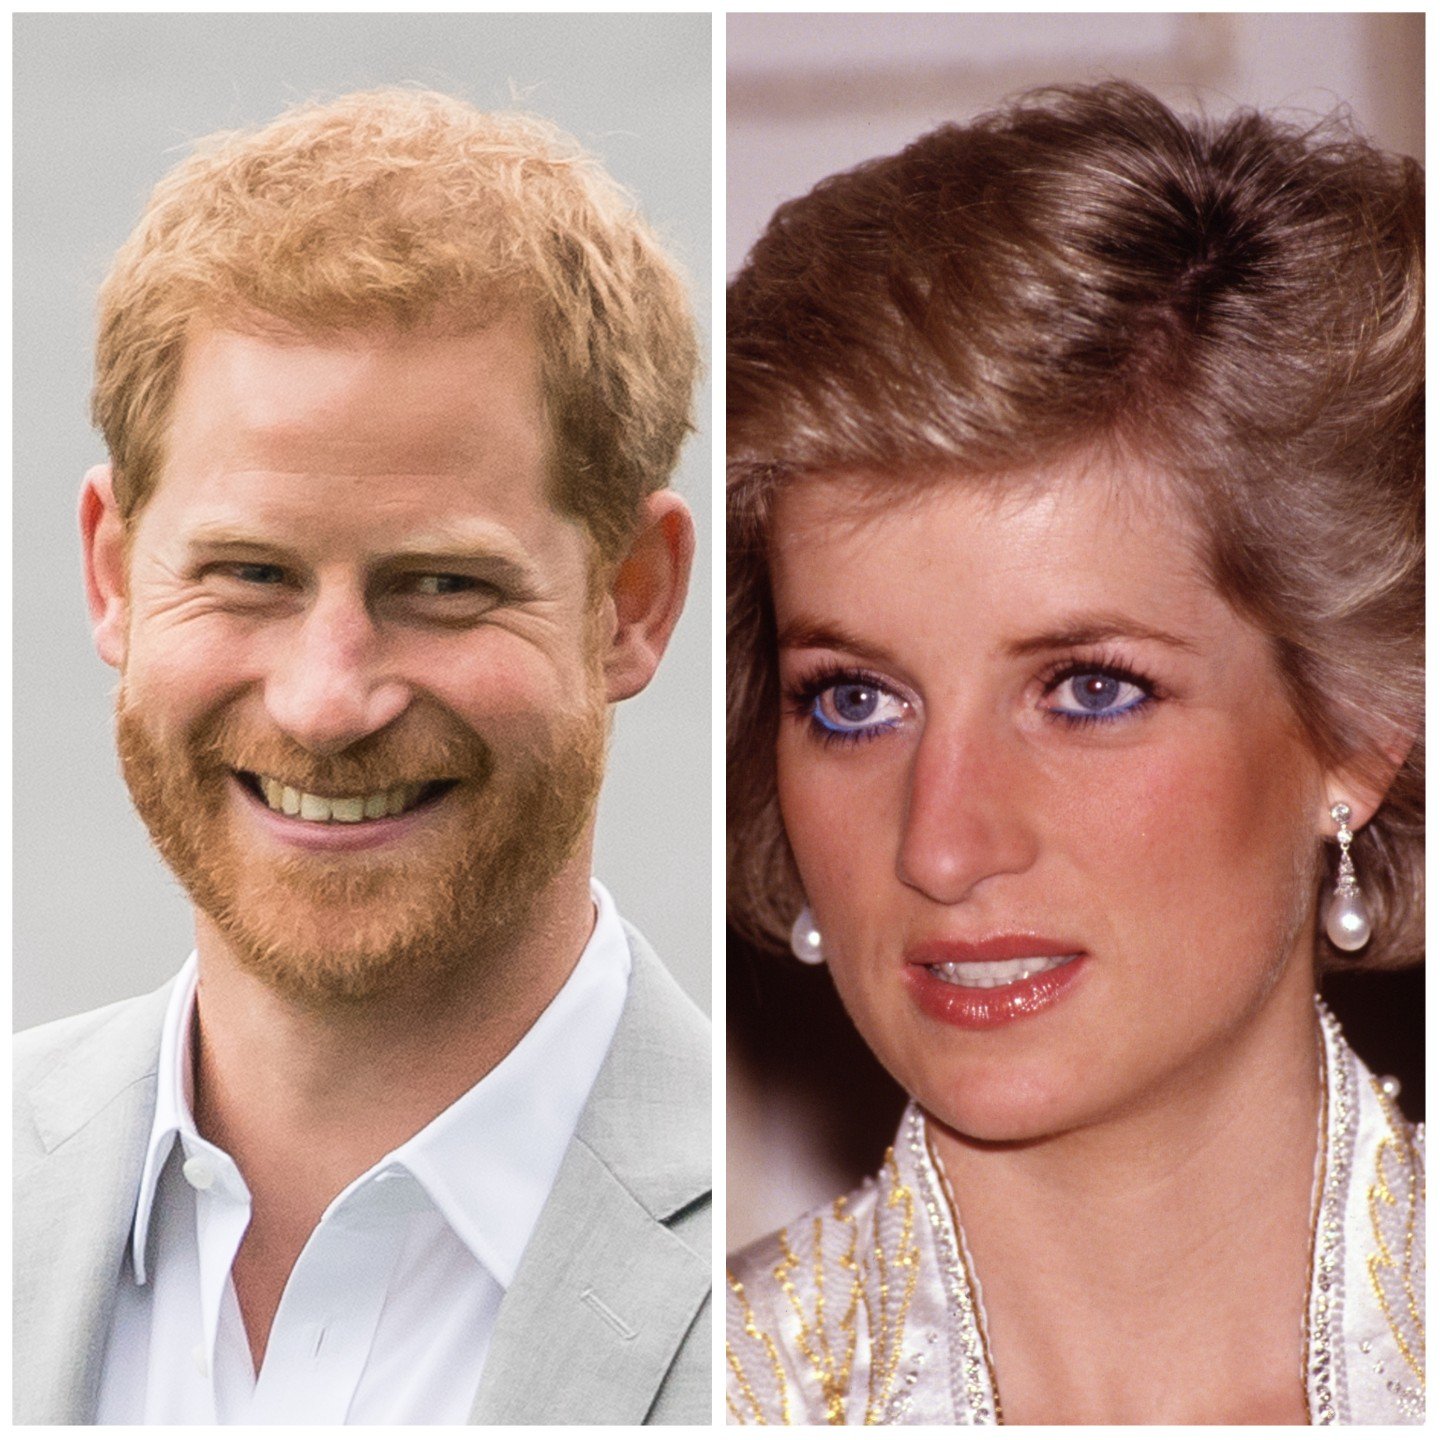 Prince Harry ‘Emulated Princess Diana’ and Showed ‘Genuine Happiness’ in New Video Says Body Language Expert